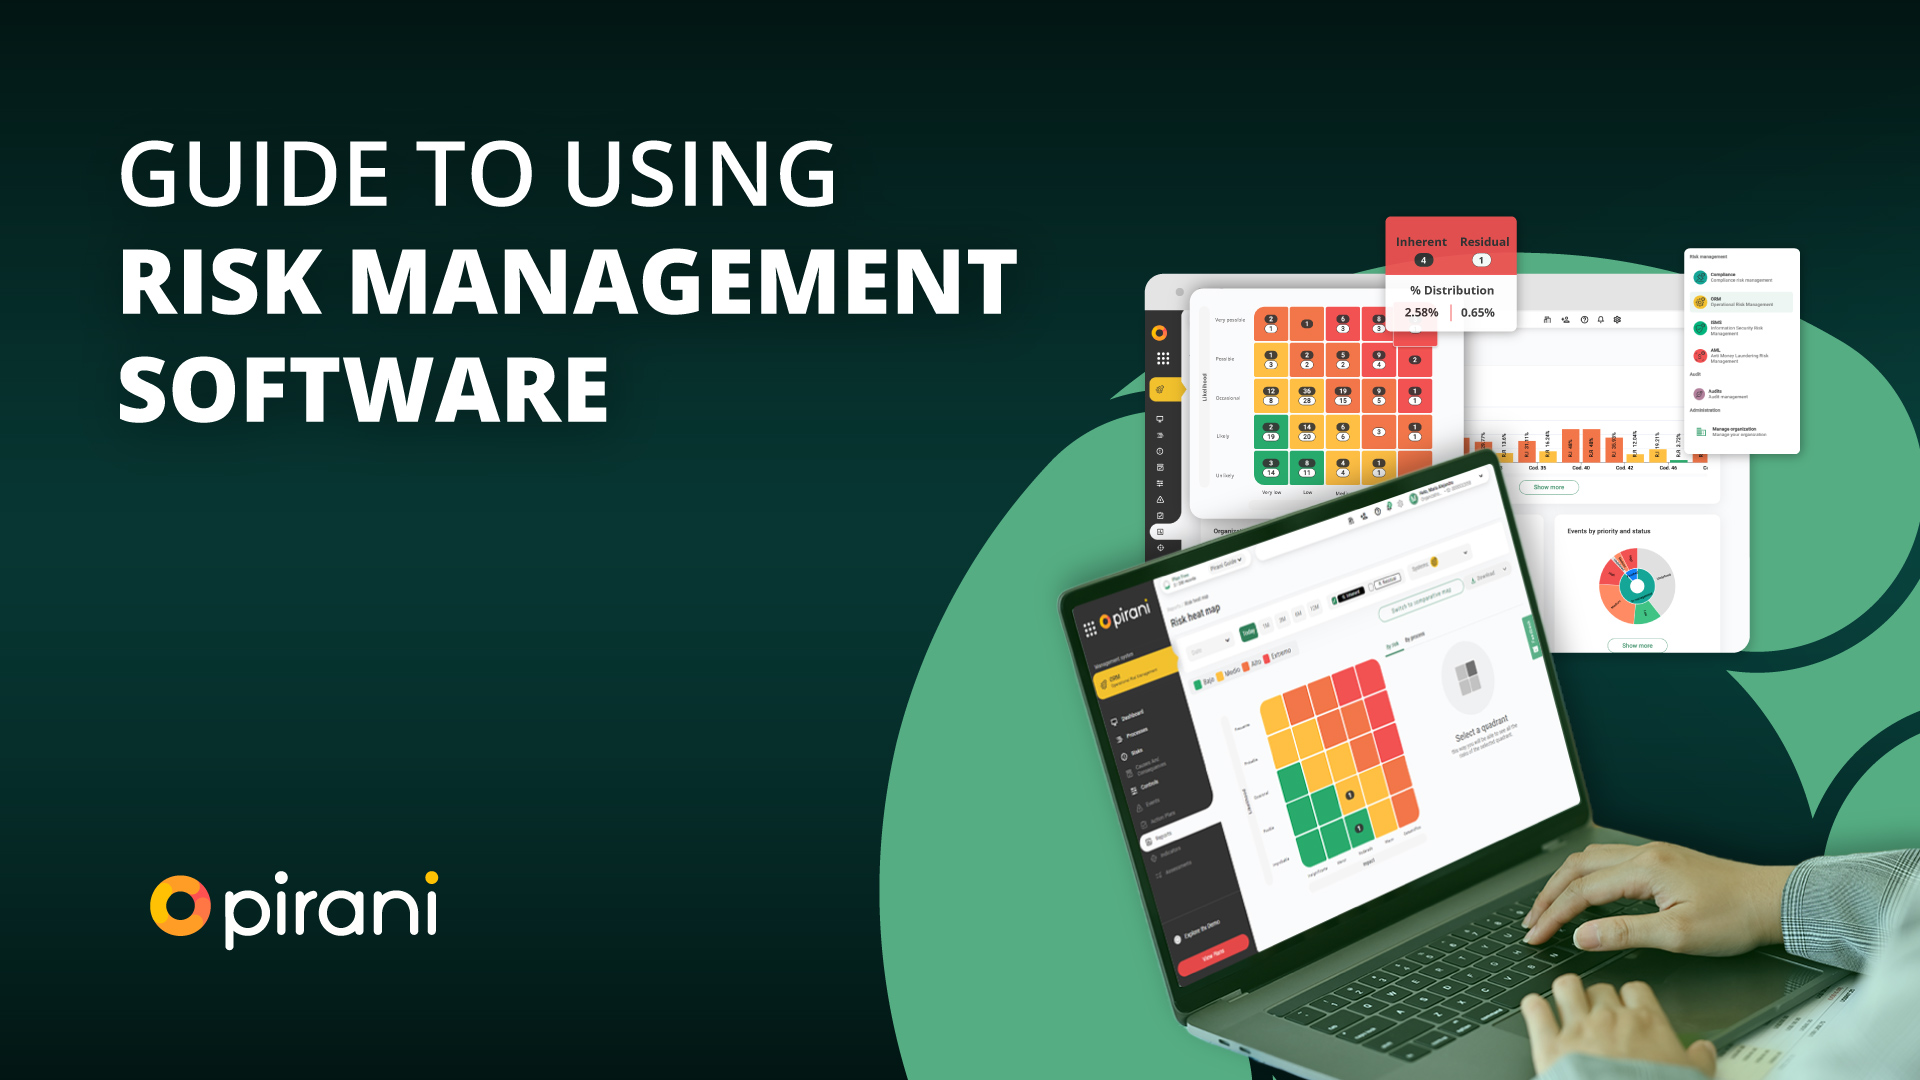 Guide to using risk management software